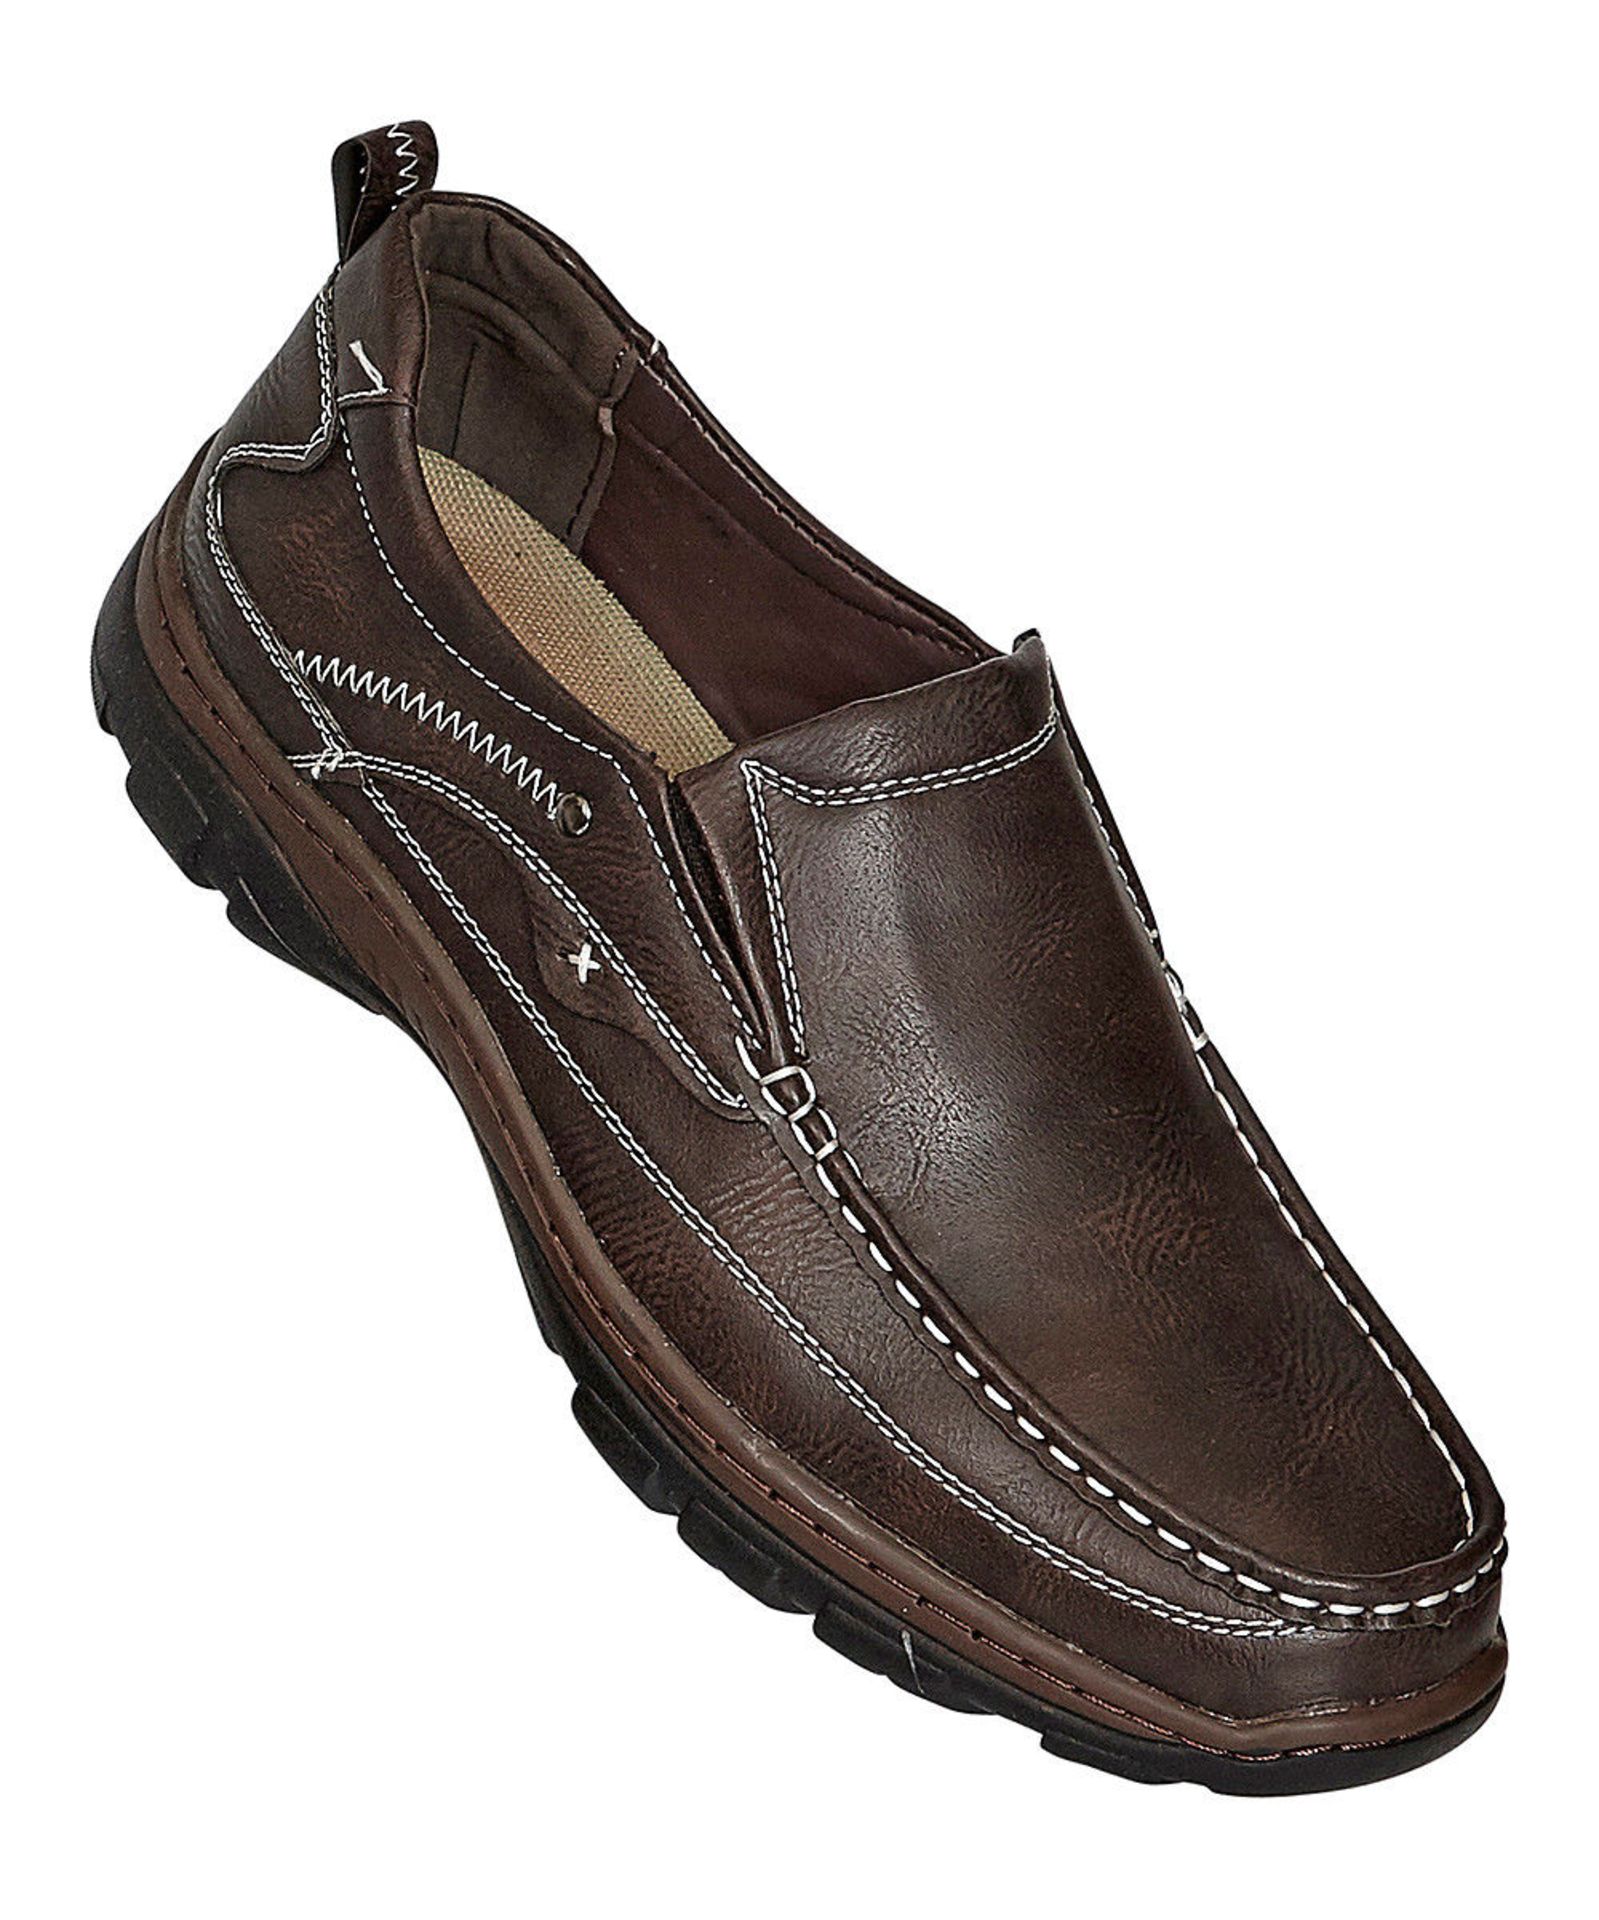 Aldo Rossini Brown Indiana Loafer (Uk Size:7.5/Us Size:8.5) (New With Box) [Ref: 53438040-B-001-Mi]